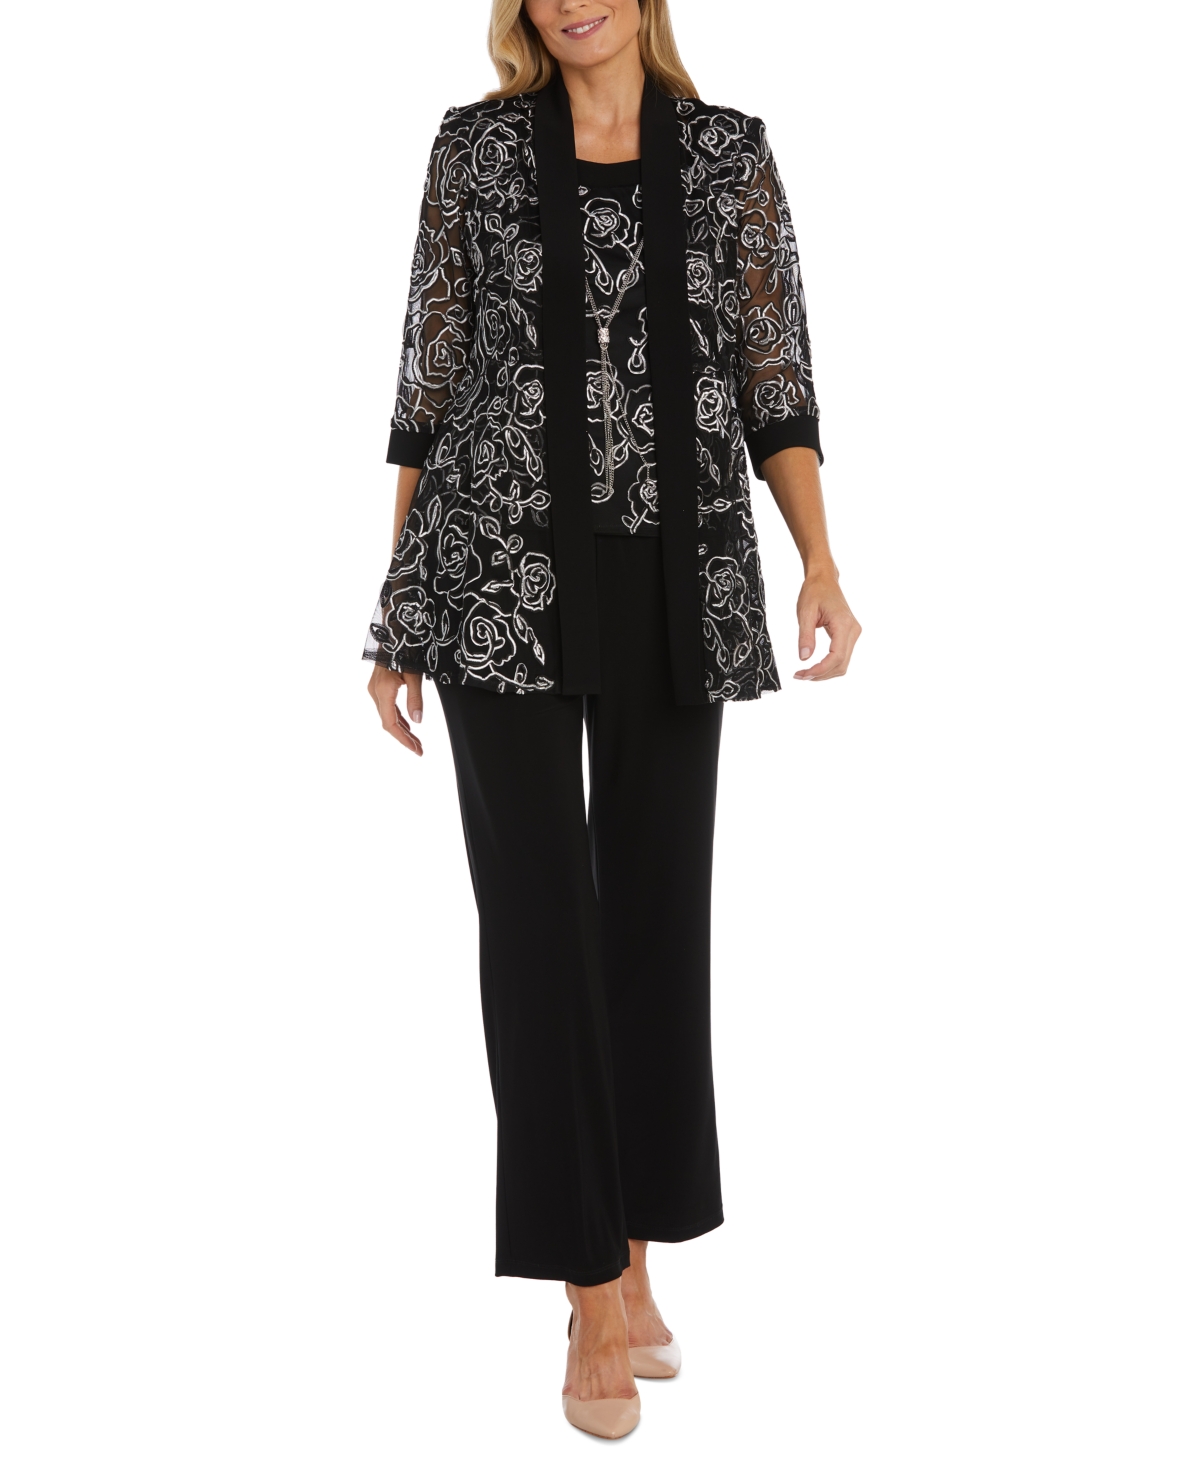 Women's Layered-Look Top & Straight-Fit Pants - Black White